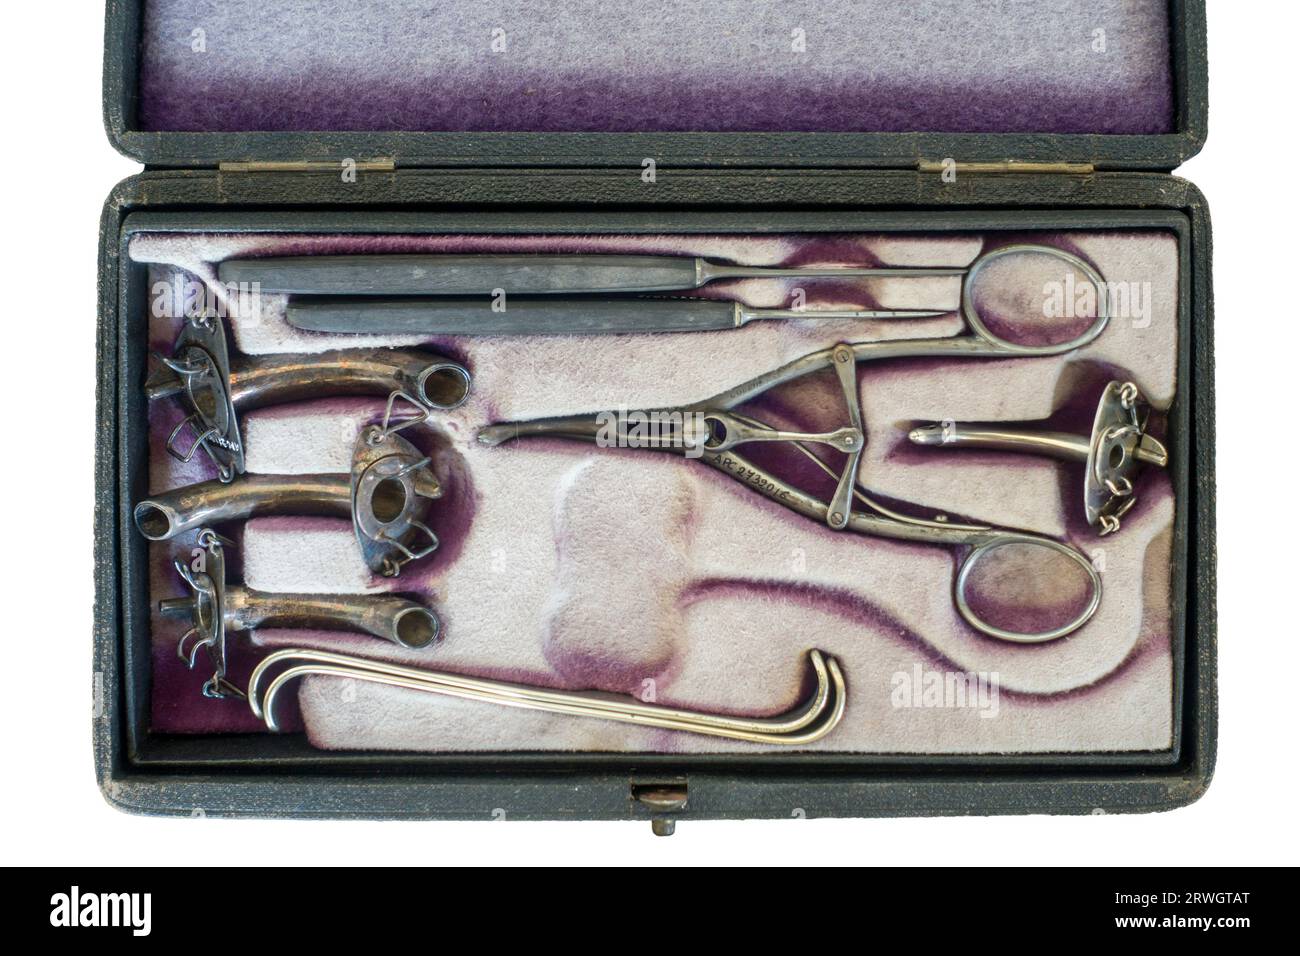 Antique tracheotomy / tracheostomy instruments in box showing tracheal tubes / tracheostomy tubes for treating severe airway obstruction Stock Photo